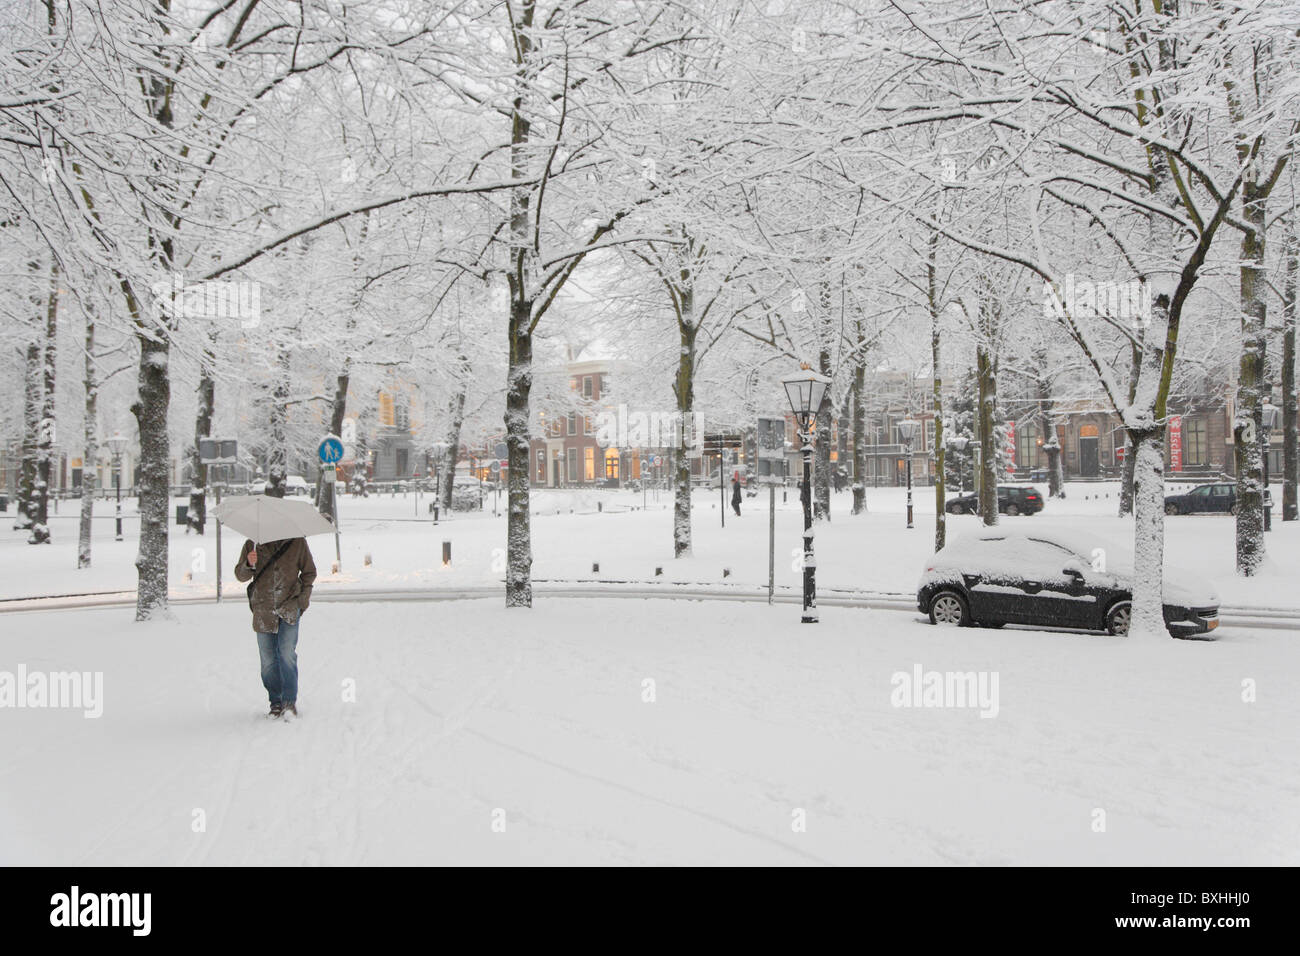 The Hague Netherlands Snow High Resolution Stock Photography and Images